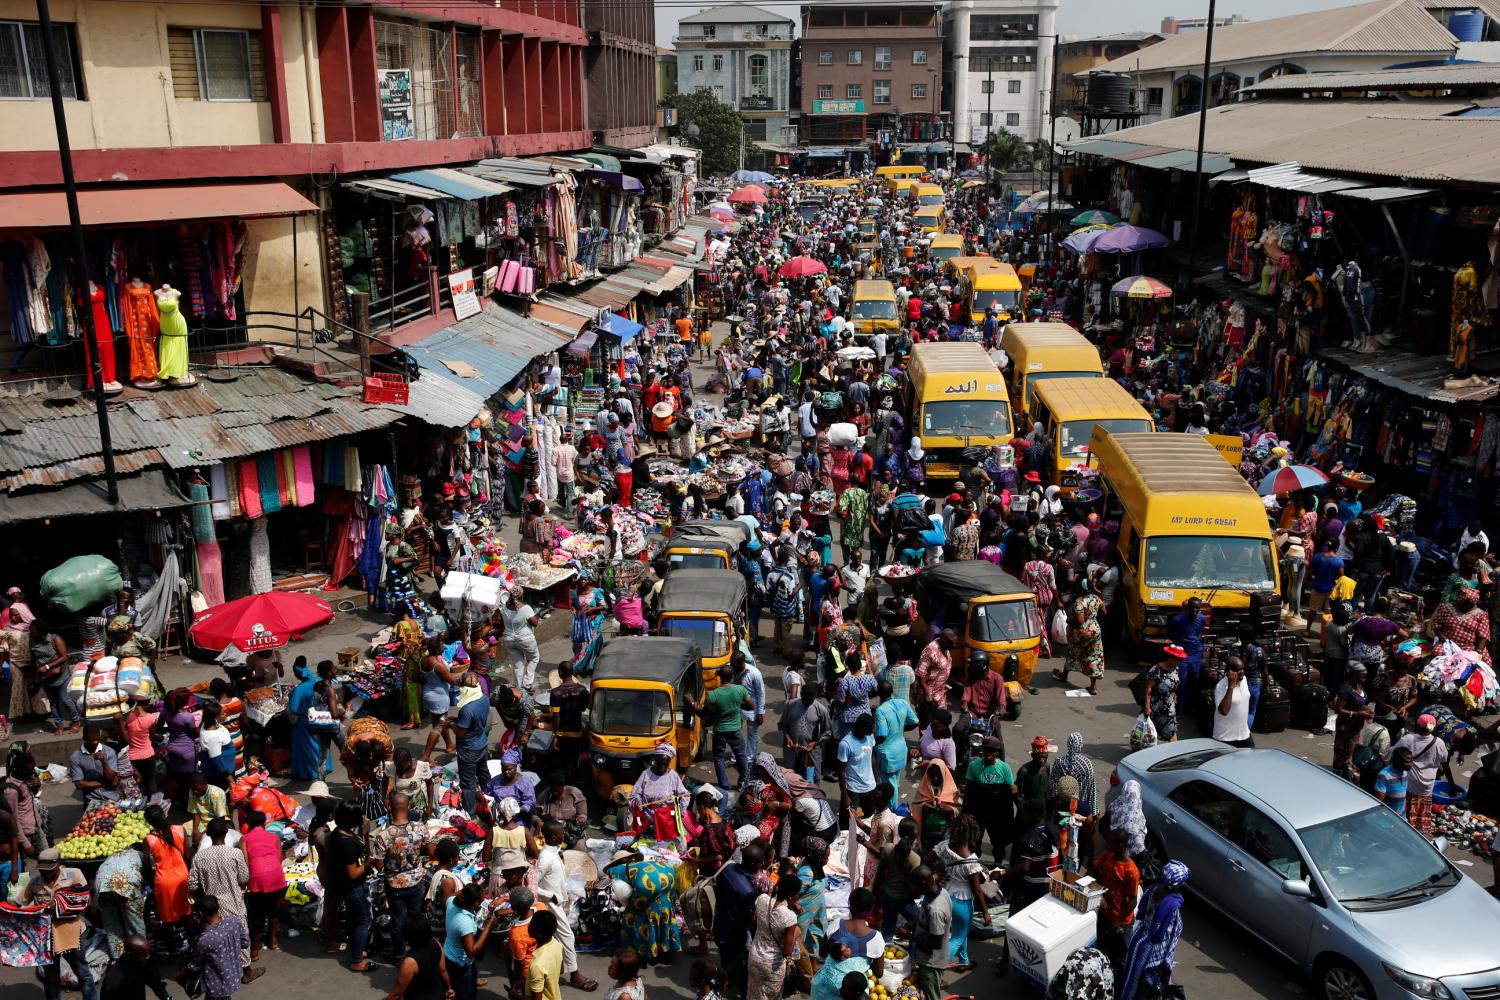 People crowd a street at the central business district in Nigeria's commercial capital Lagos ahead of Christmas December 23, 2016.